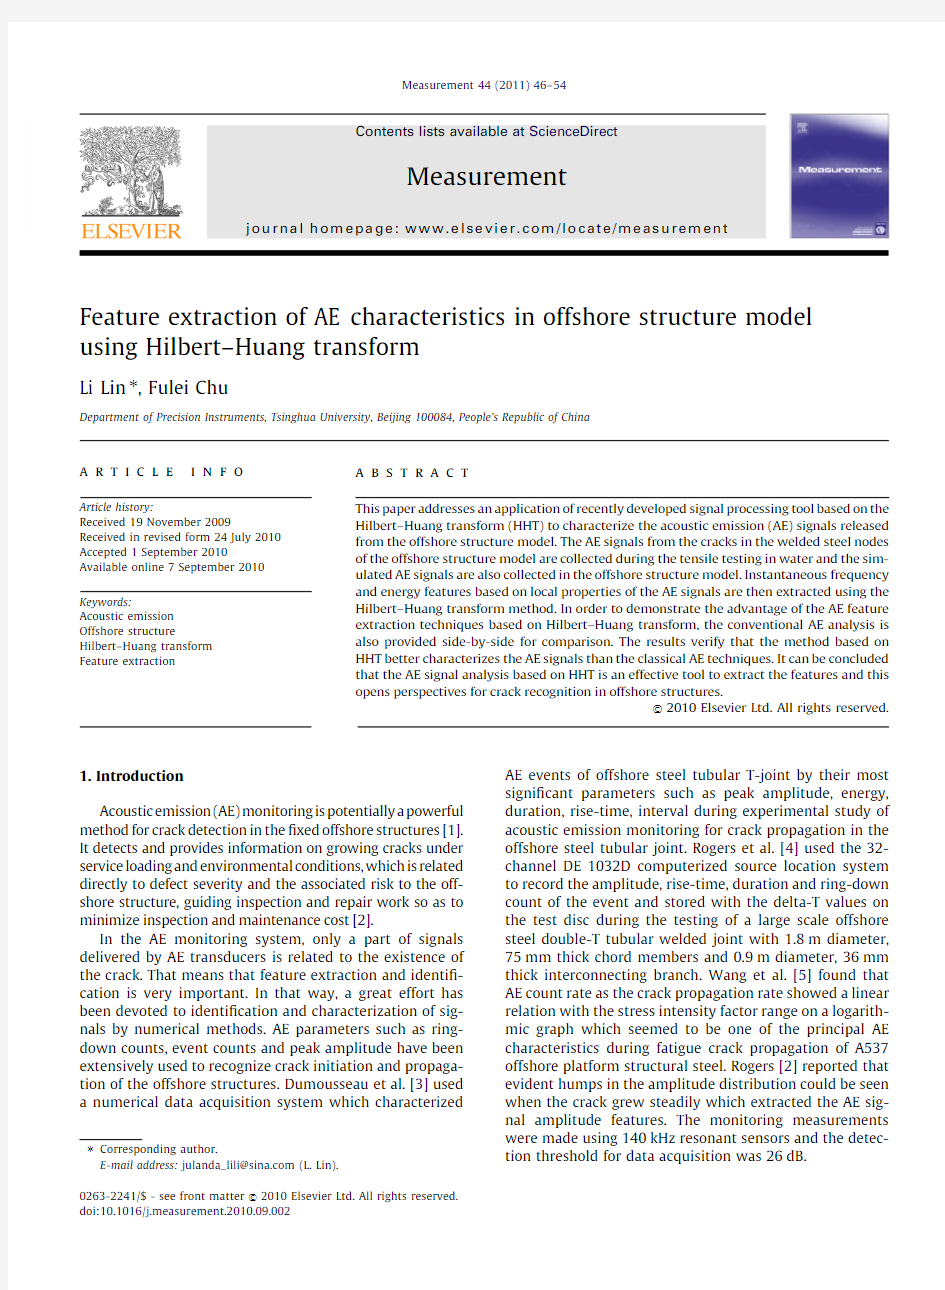 Feature extraction of AE characteristics in offshore structure model using Hilbert–Huang transform